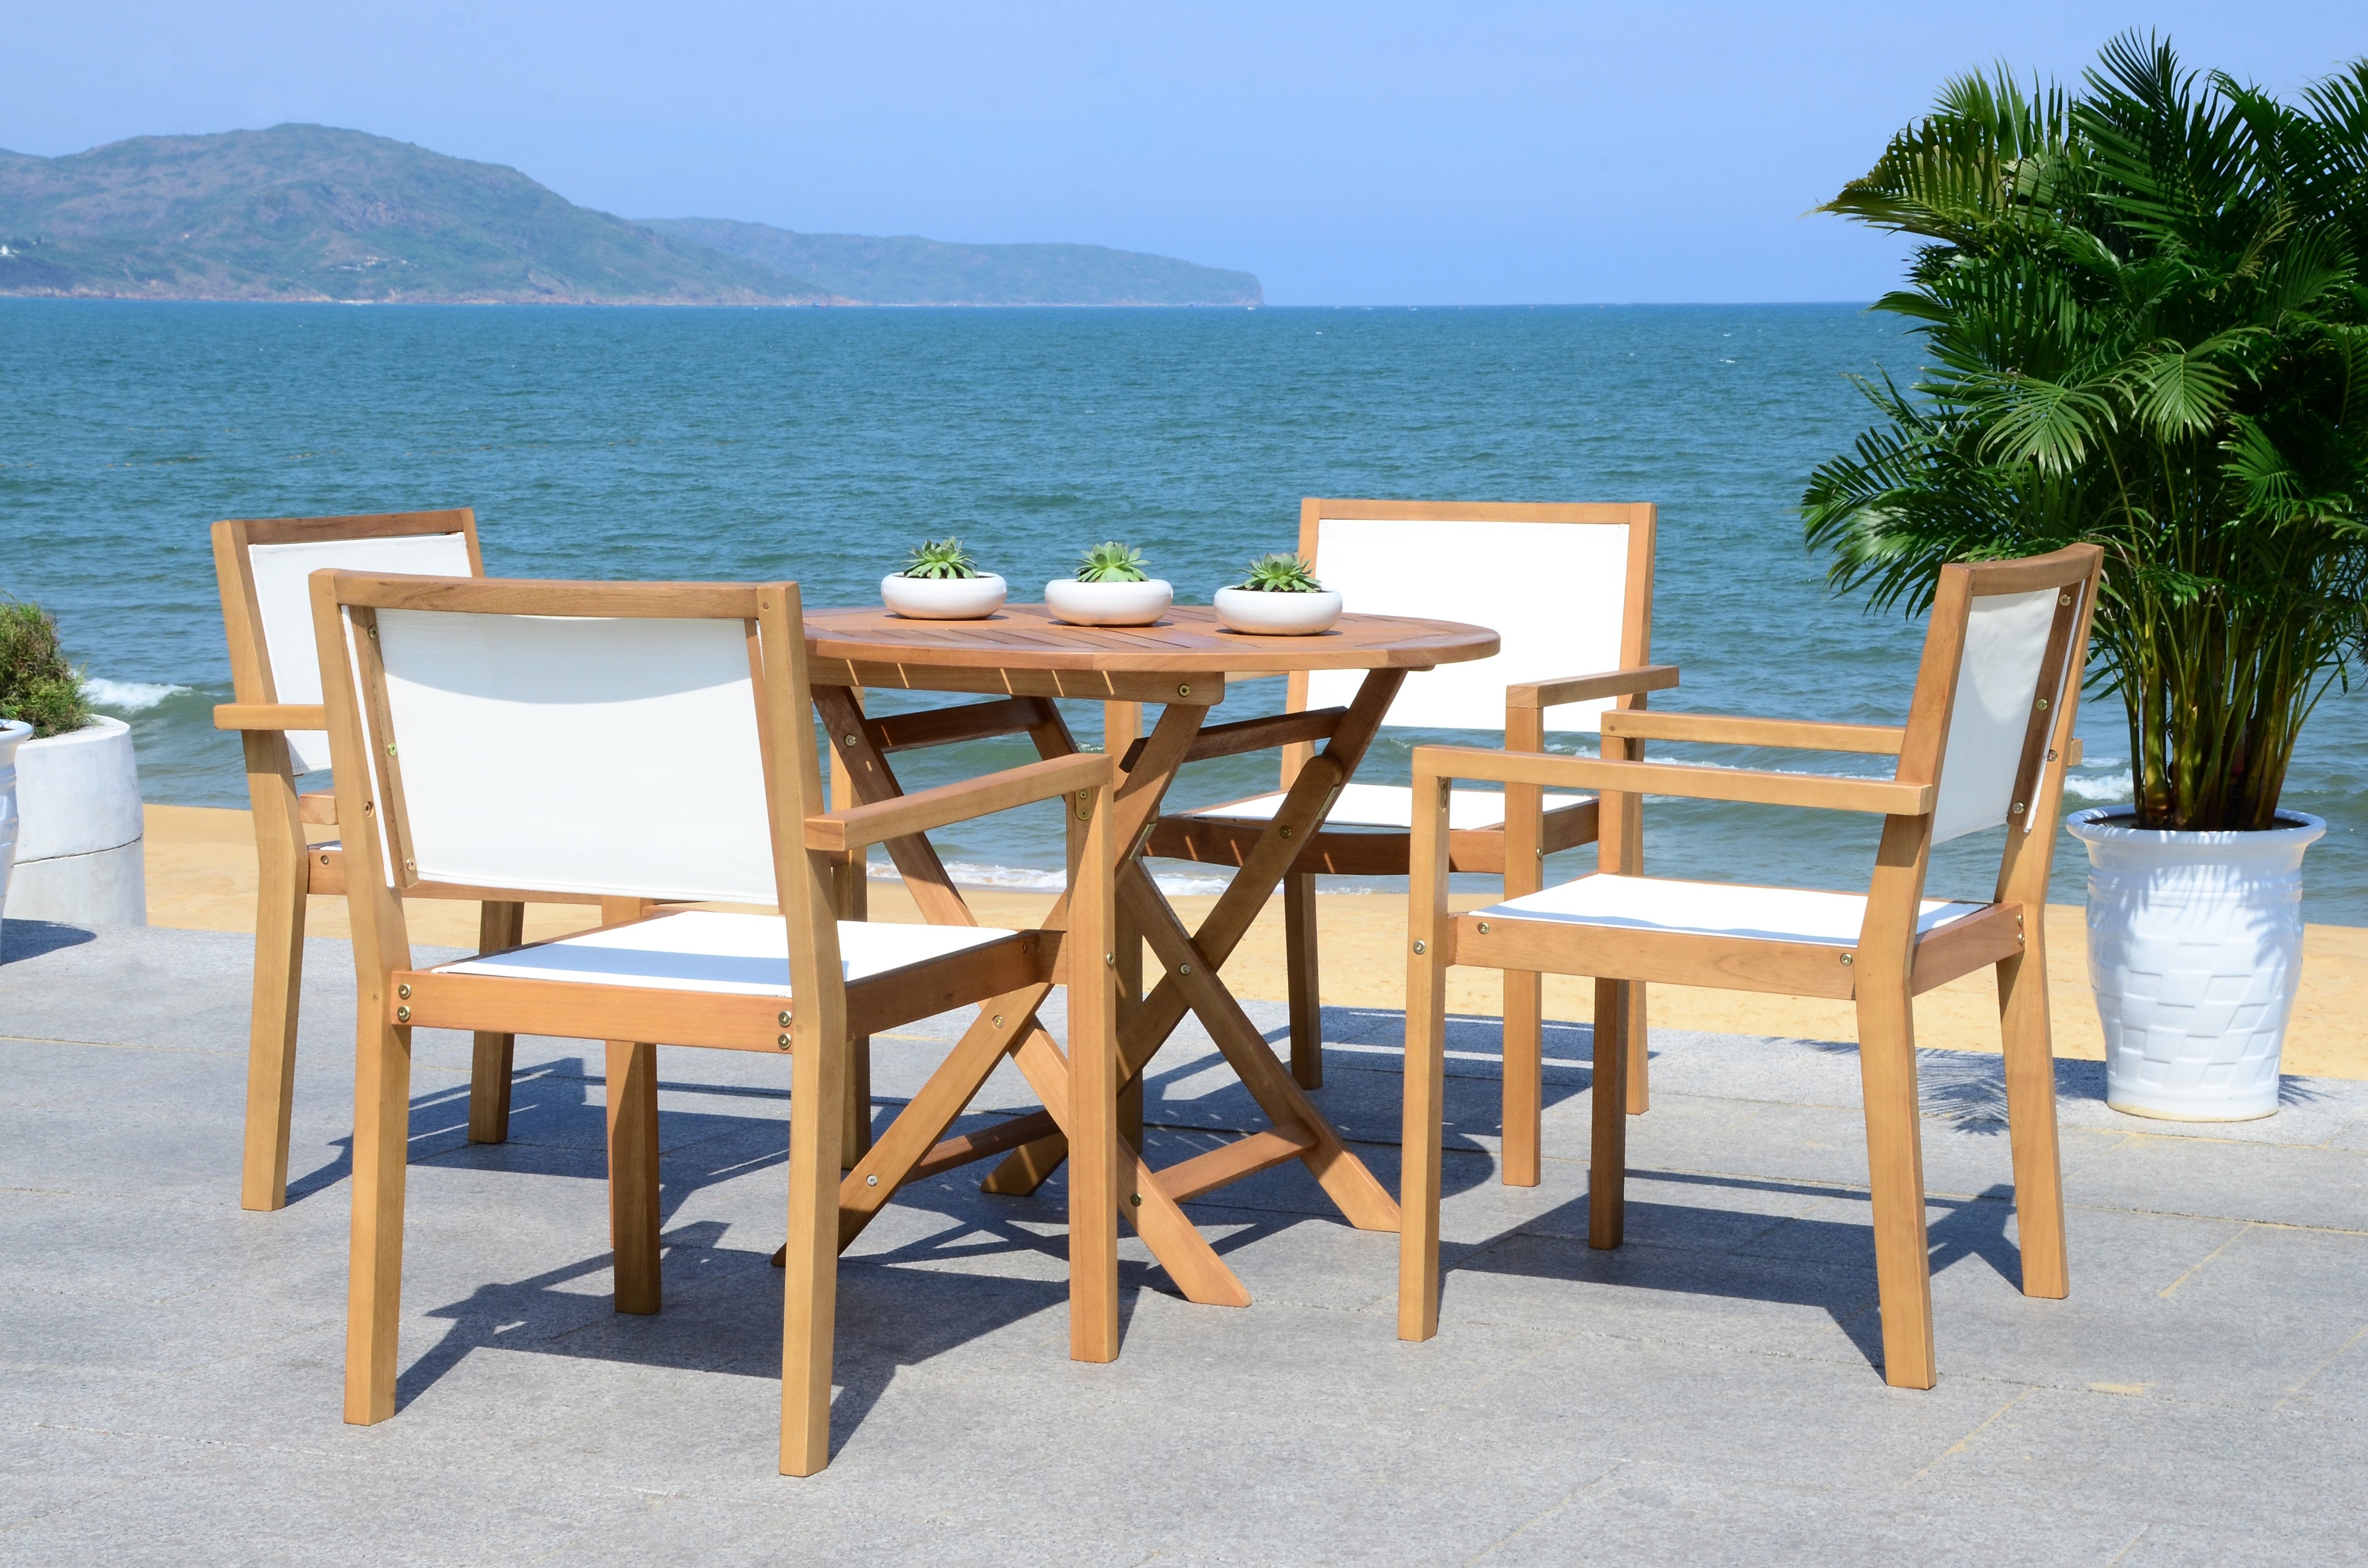 Chante 35.4-Inch Dia Round Table 5 Piece Dining Set - Natural - Safavieh - Image 5